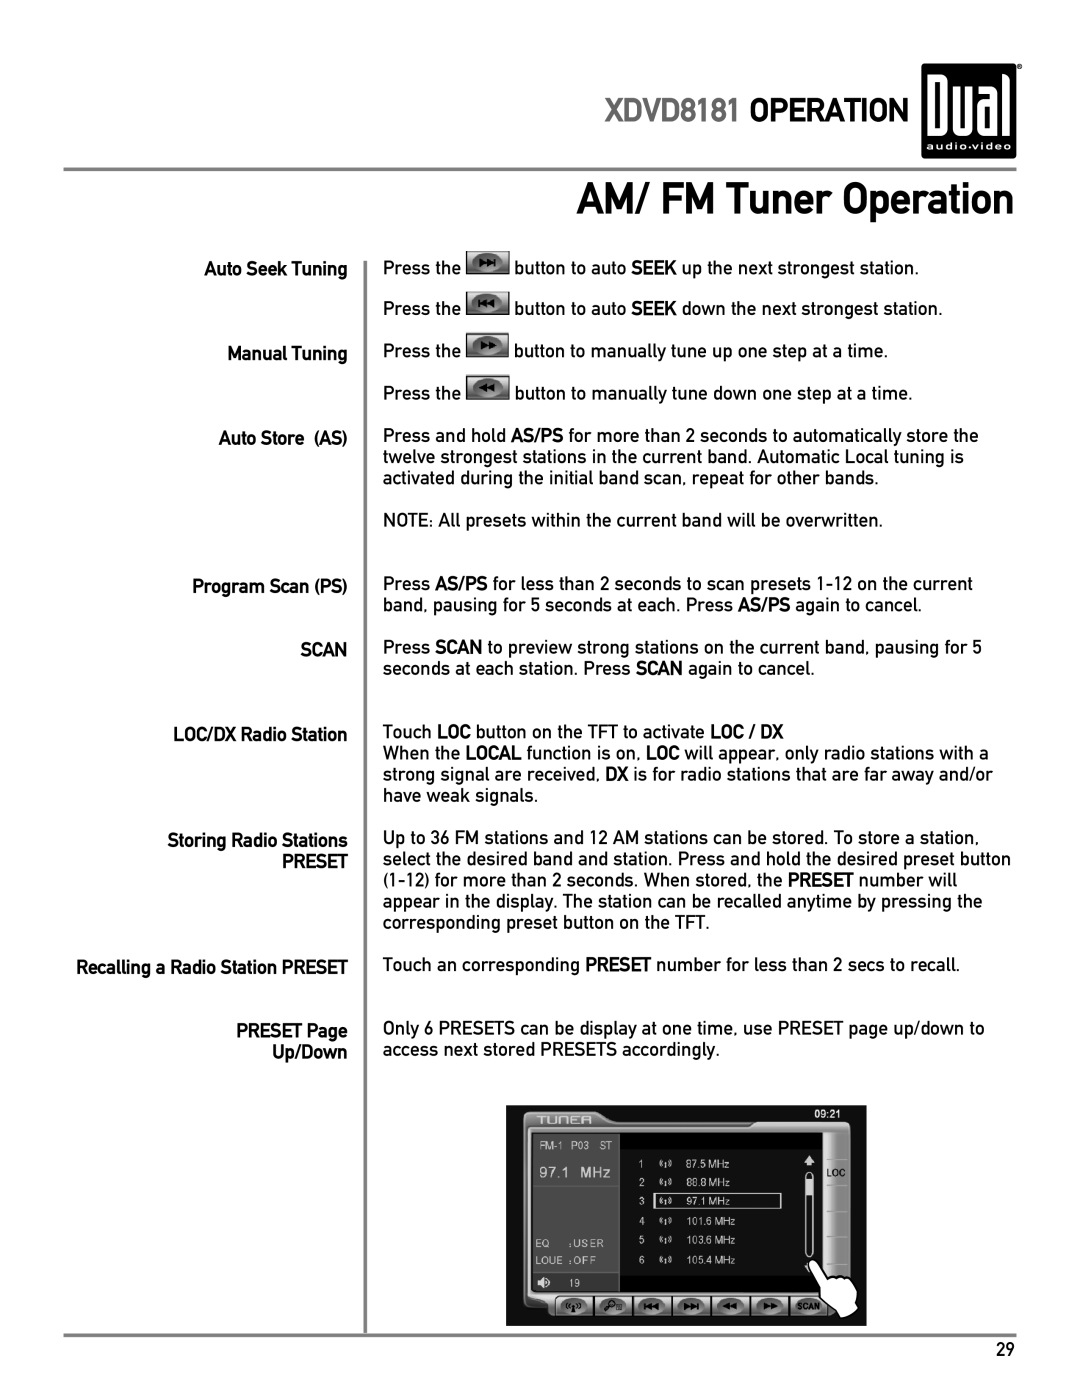 Dual AM/ FM Tuner Operation, XDVD8181 OPERATION, Auto Seek Tuning Manual Tuning Auto Store AS, PRESET Page Up/Down 